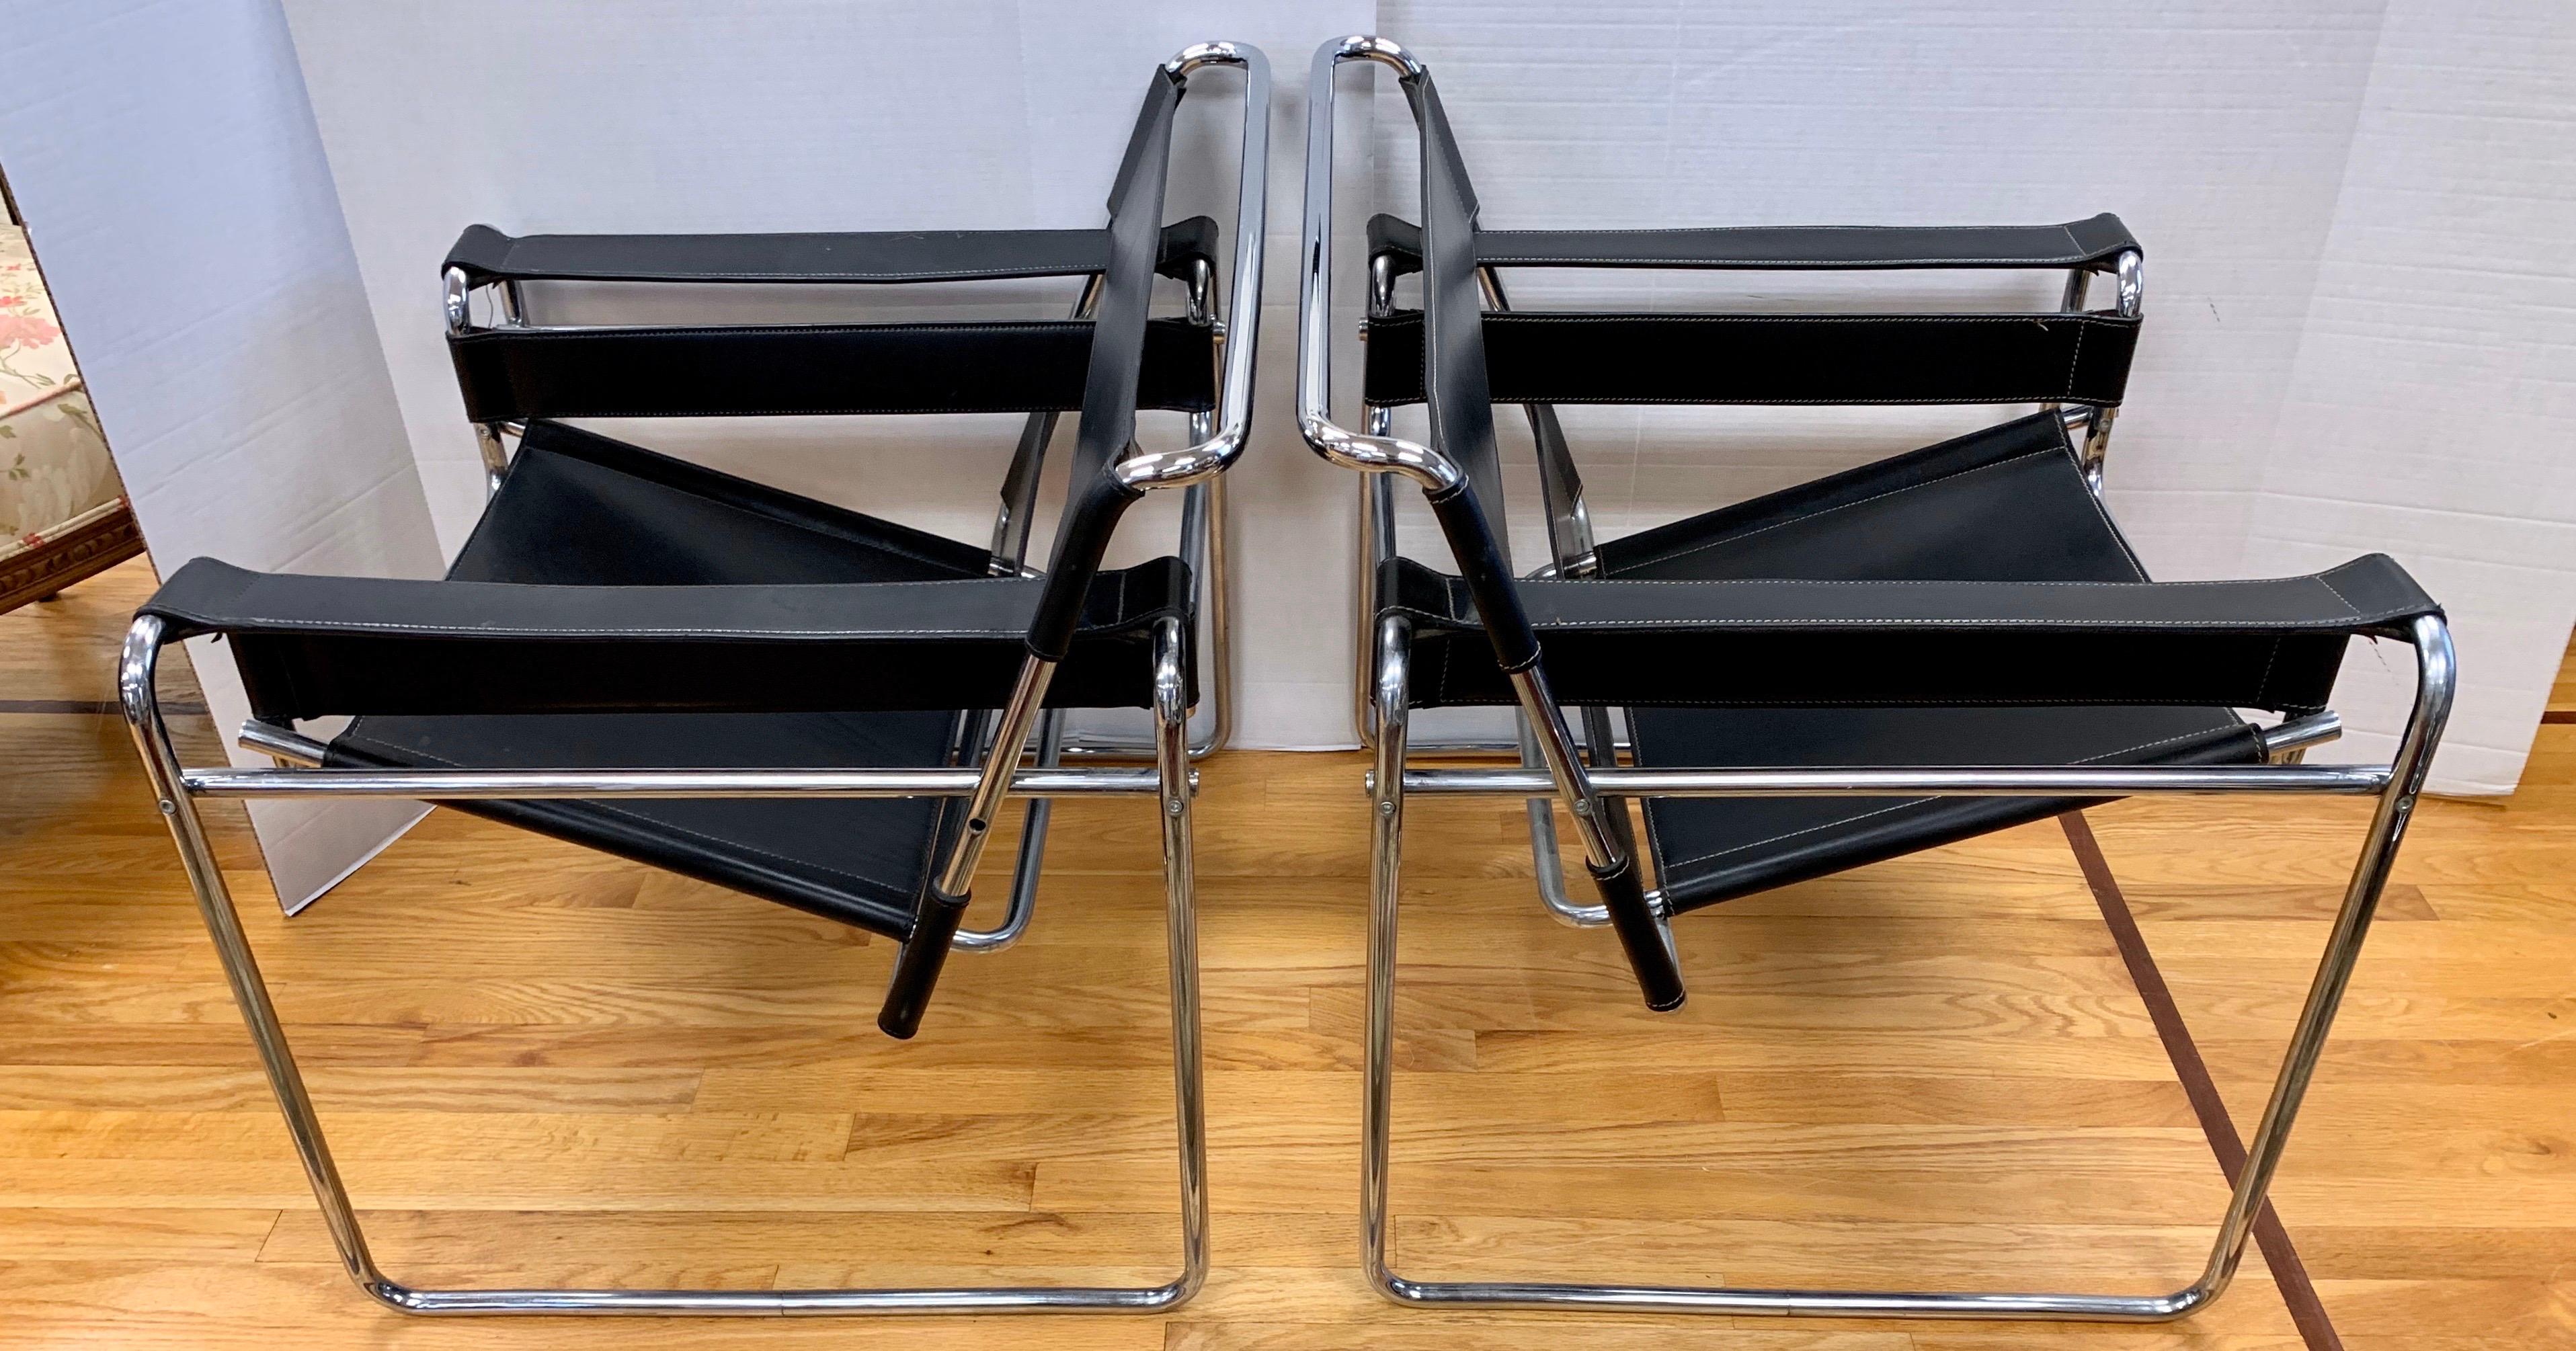 Iconic Marcel Breuer style black leather Wassily chairs, circa 1980s. Made in Italy.
There are no manufacturer hallmarks. The leather and chrome is in excellent condition
especially given their age. In spirit and stature, the Wassily chair has few